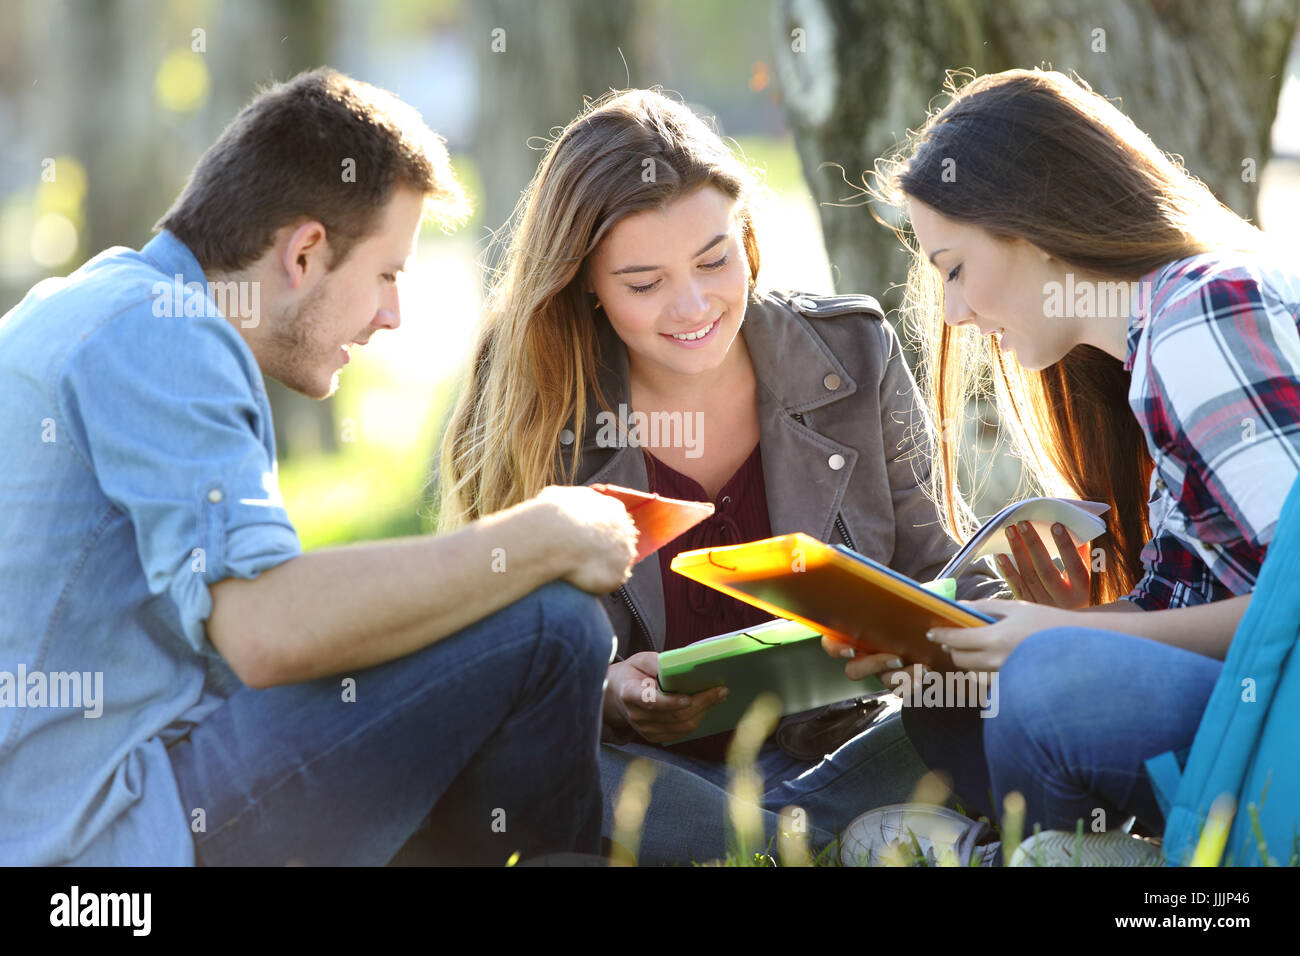 Three students studying reading notes together outdoors sitting on the grass Stock Photo